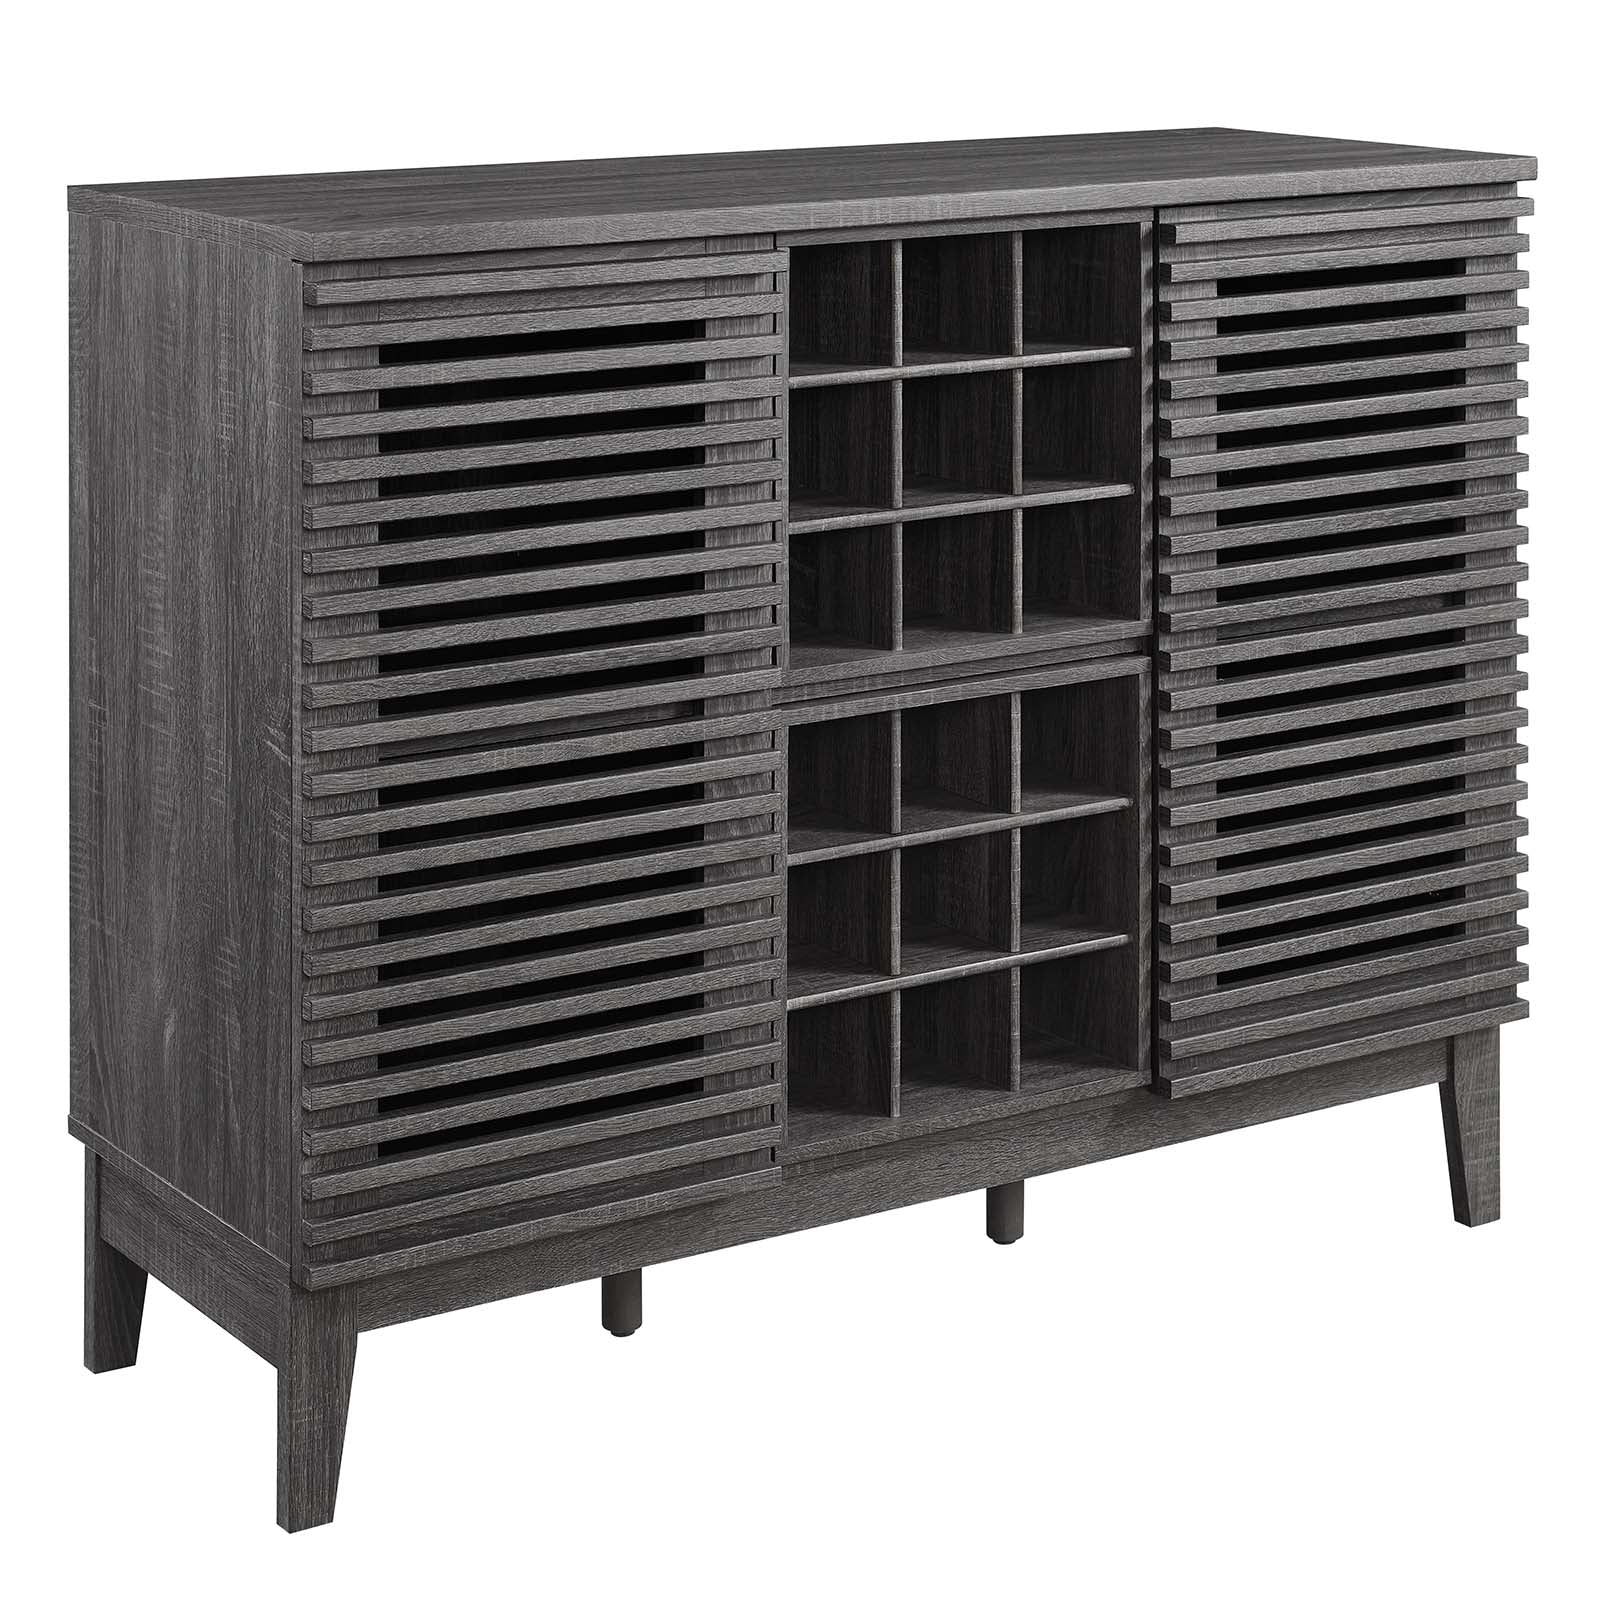 Modway Buffets & Cabinets - Render Bar Cabinet Charcoal